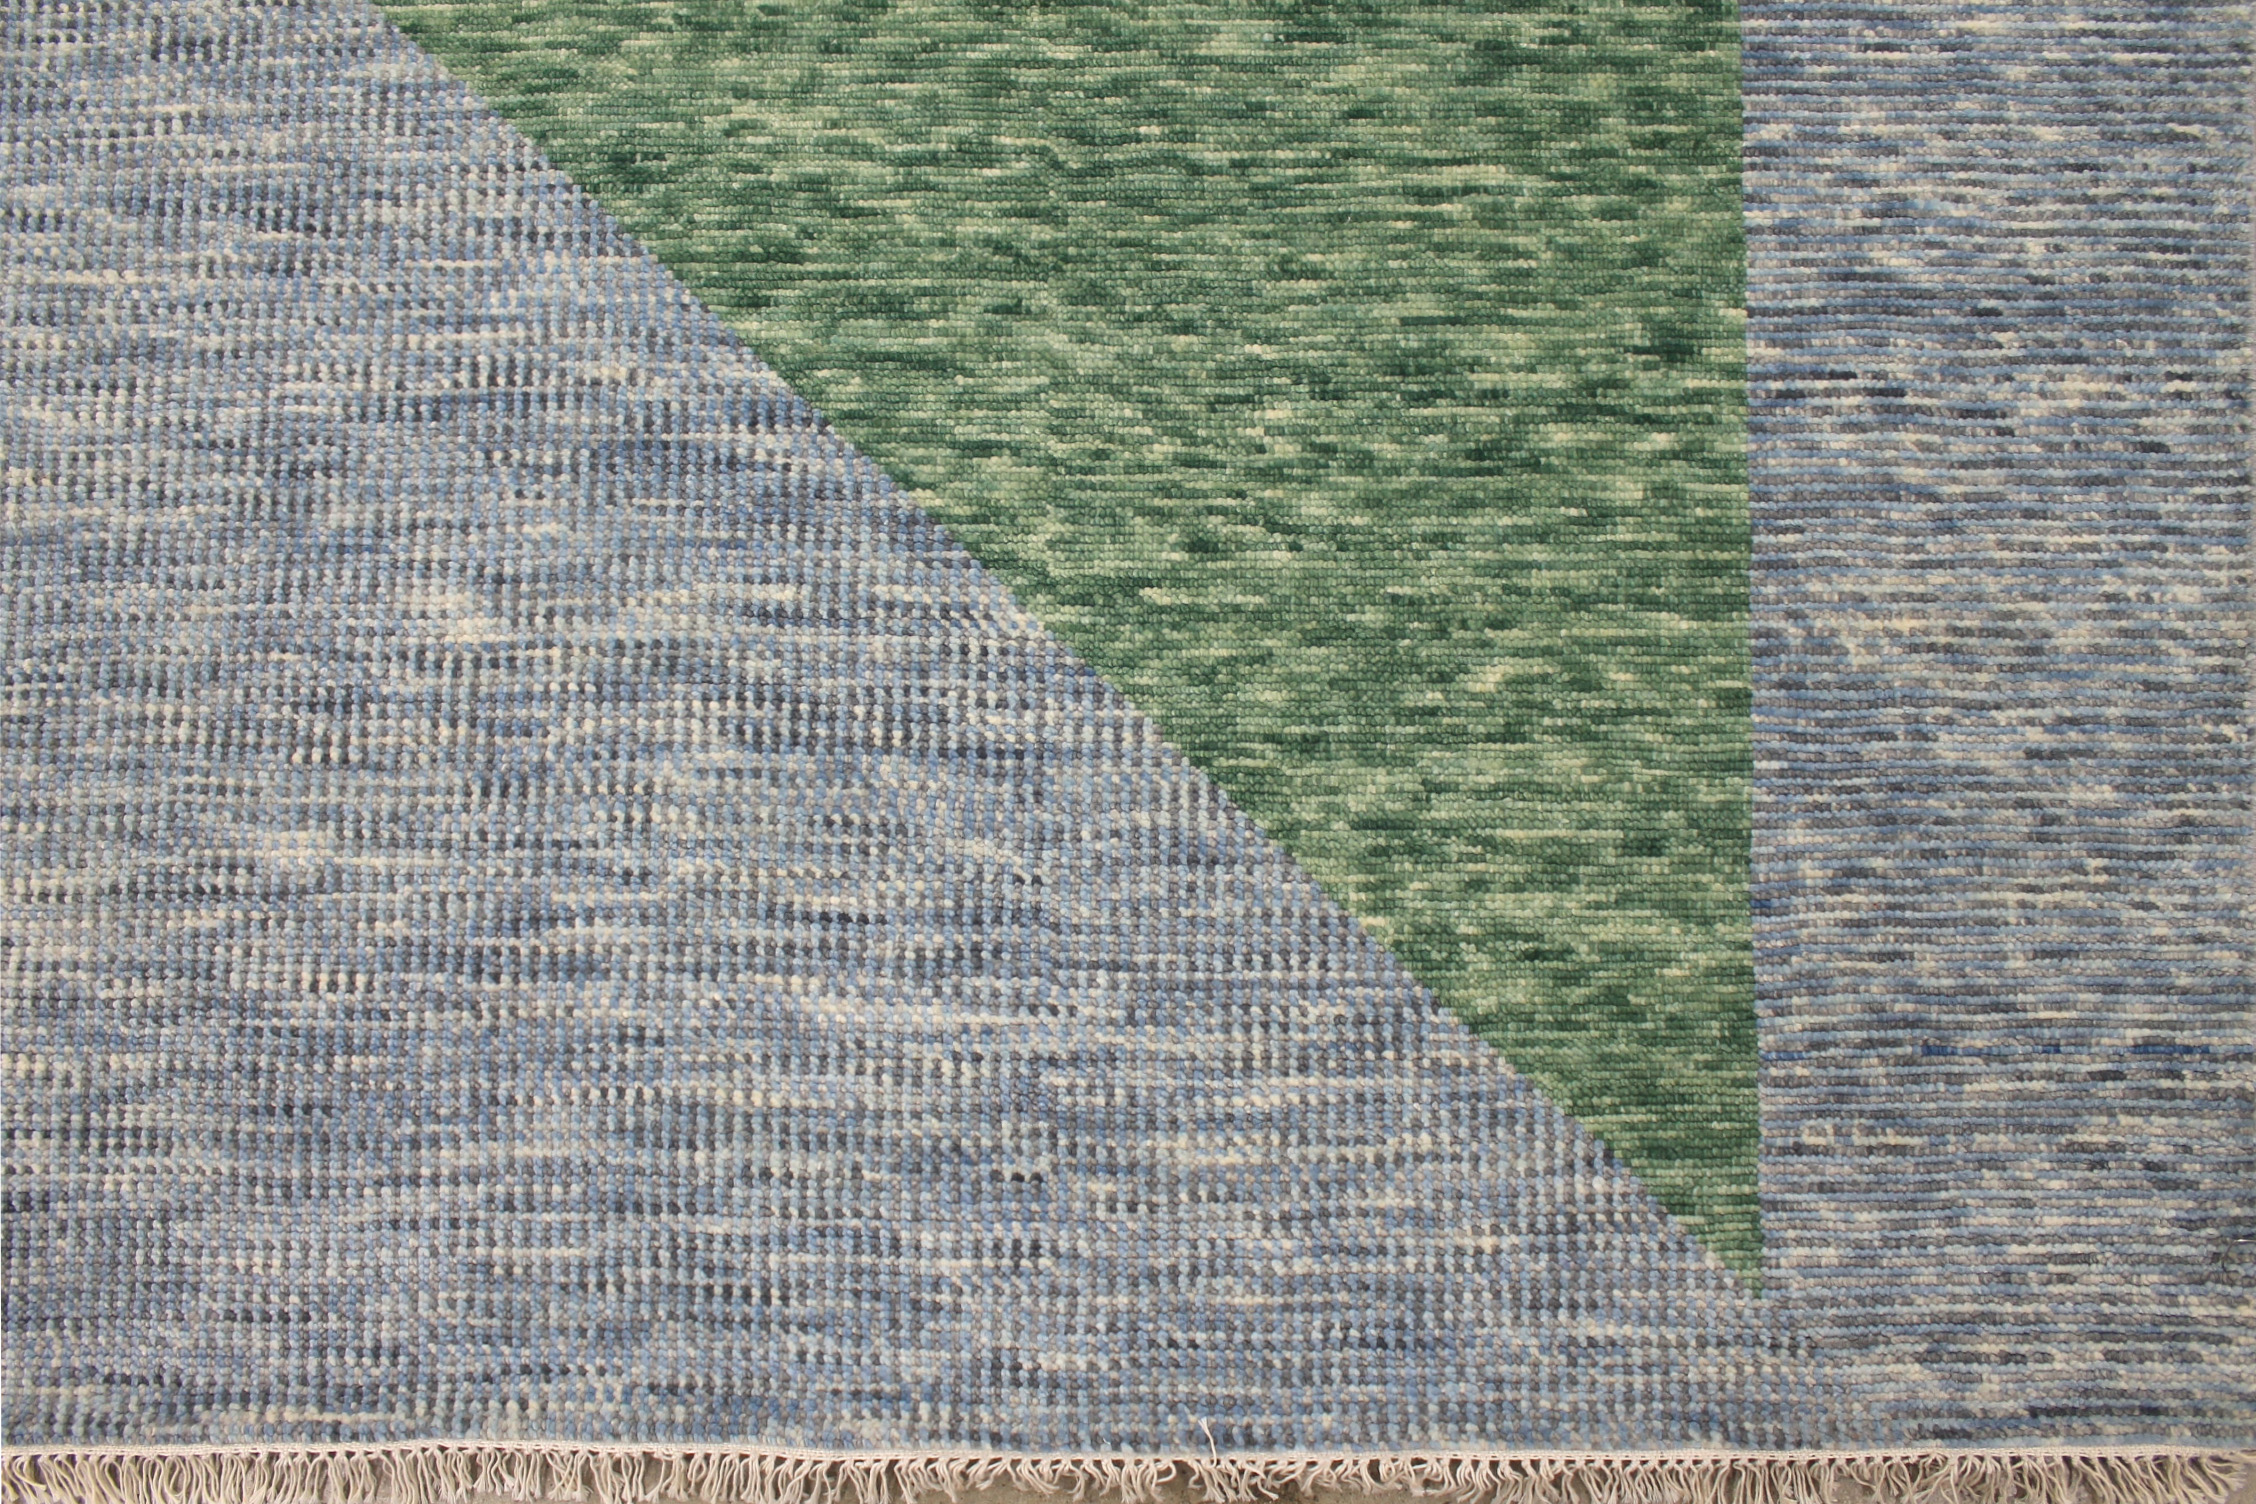 Contemporary & Modern Rugs EDGE 027546 Lt. Blue - Blue & Lt. Grey - Grey Hand Knotted Rug